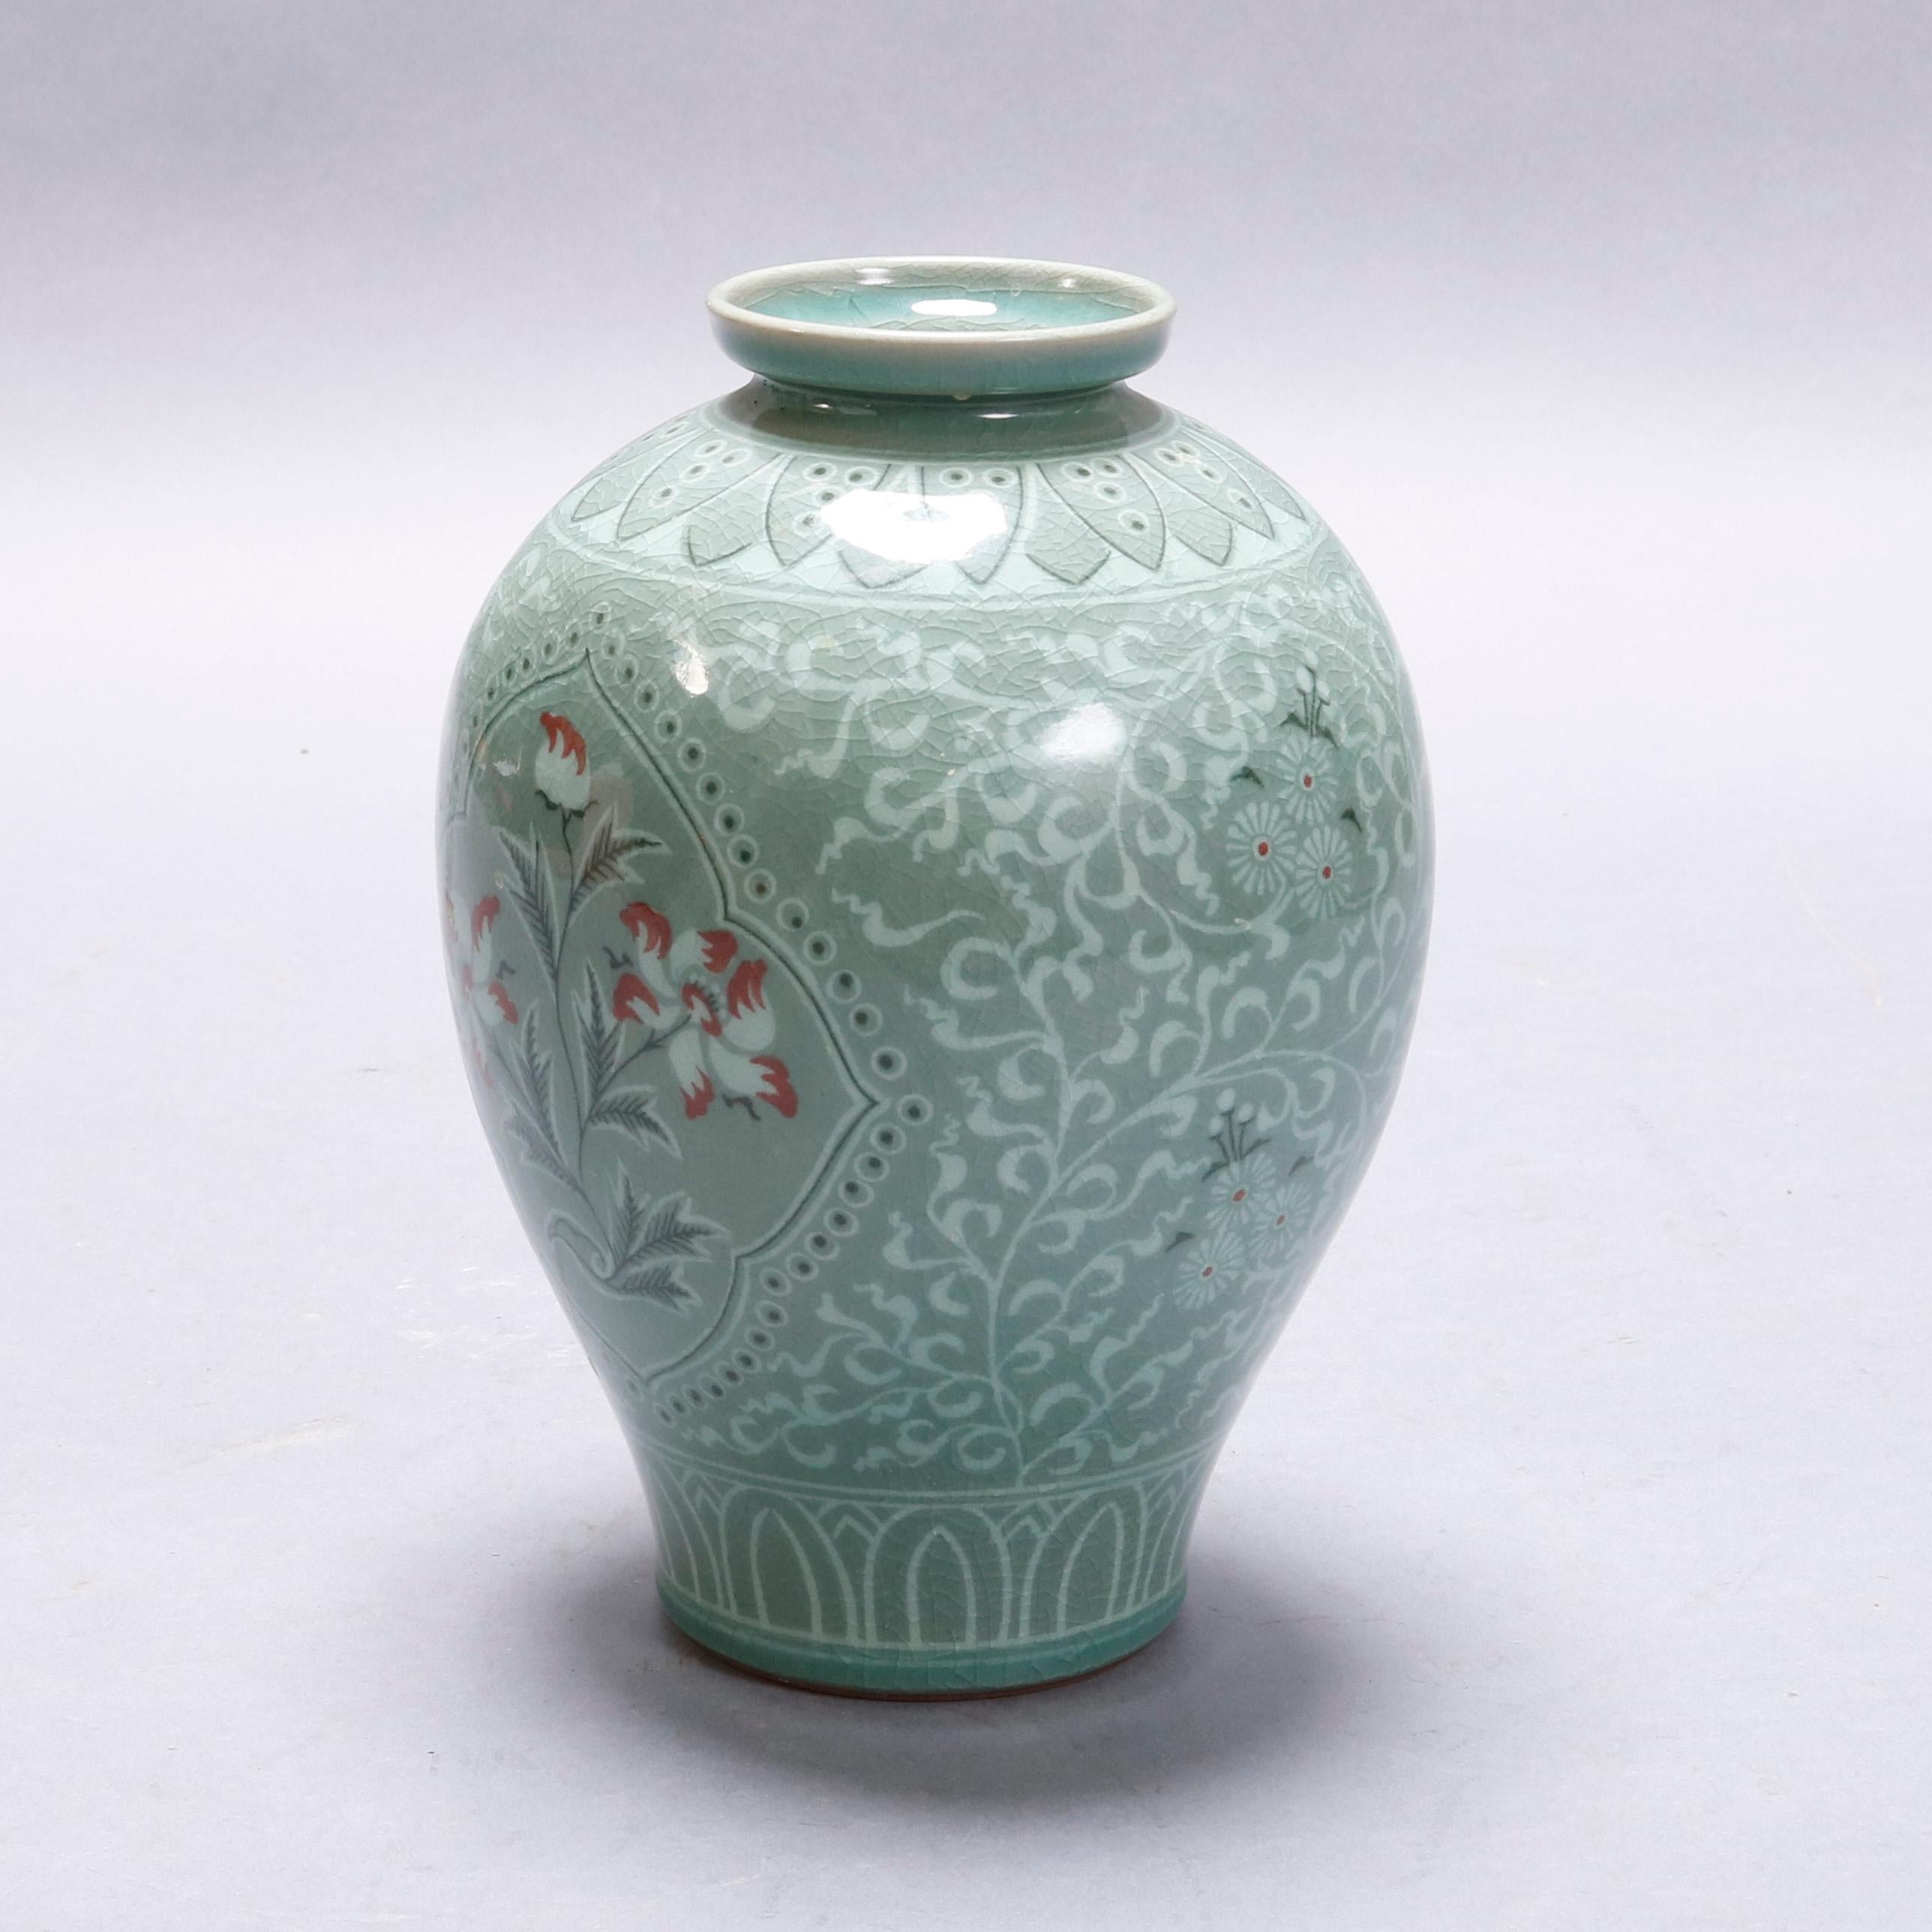 Hand-Painted Japanese Celadon Foliate & Floral Decorated Porcelain Signed Vase, 20th Century